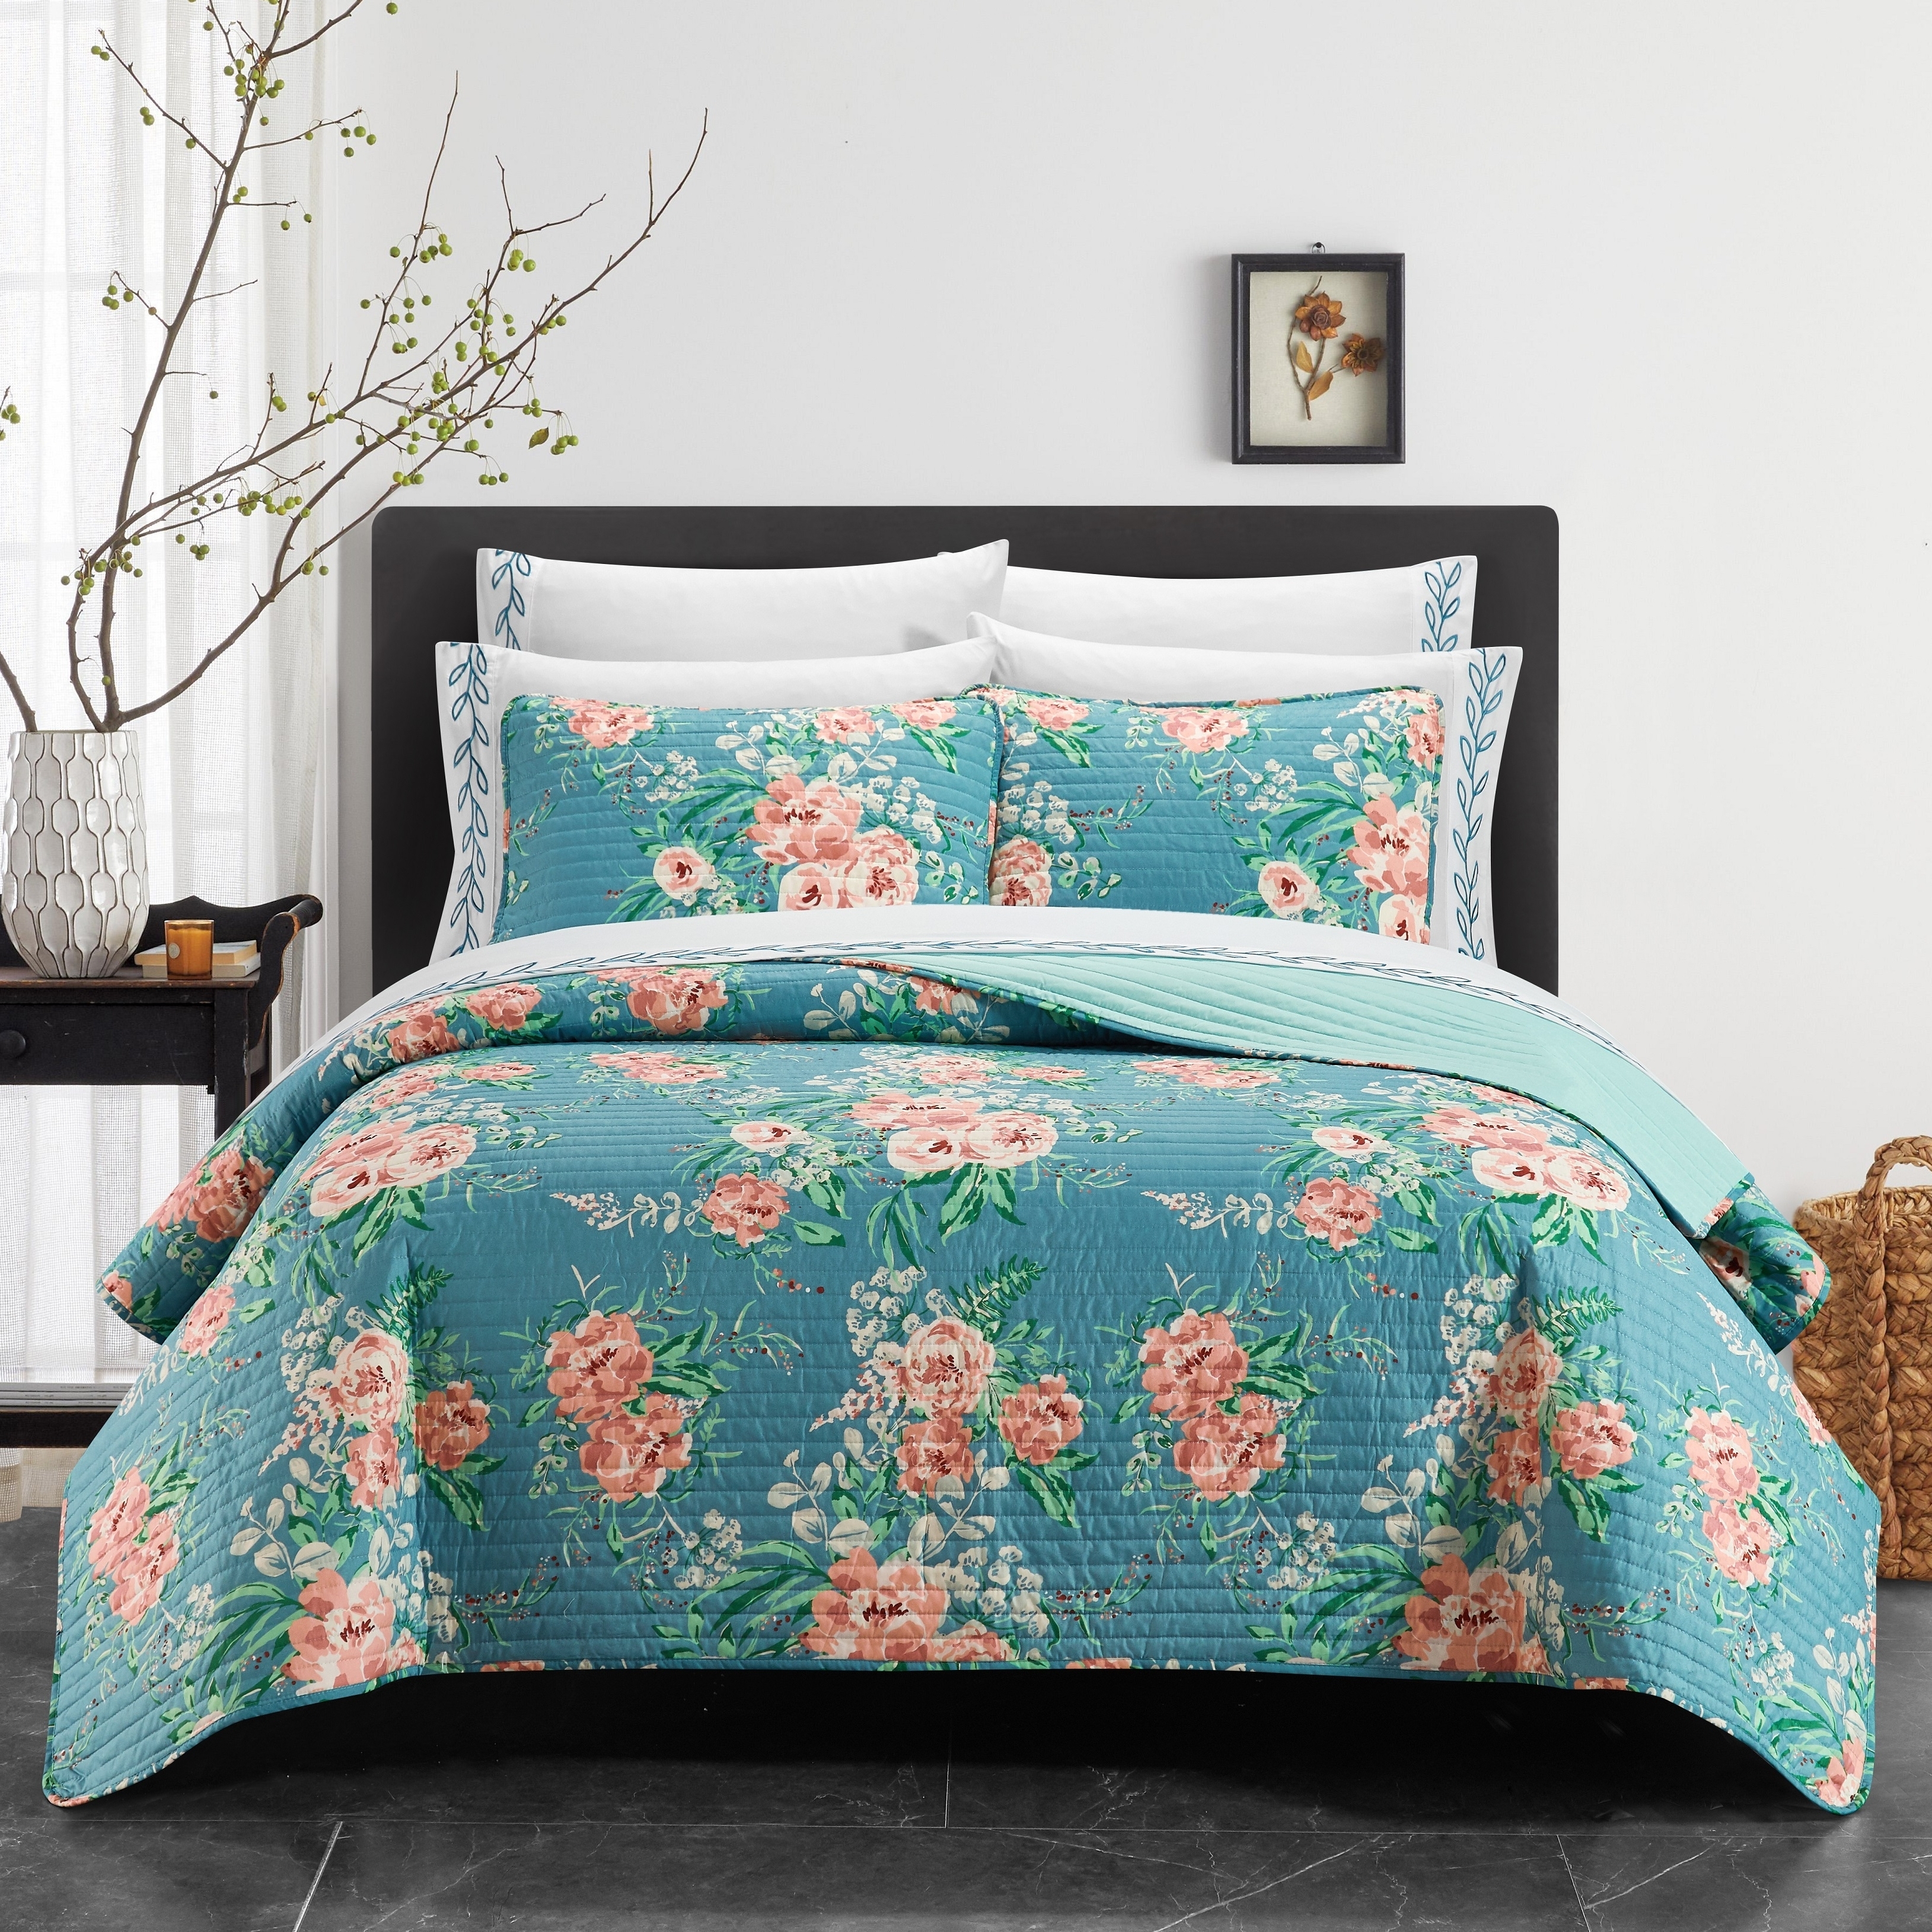 Palm Spring 9 Or 6 Piece Quilt Set Watercolor Floral Pattern Print Bed In A Bag - Aqua, Full